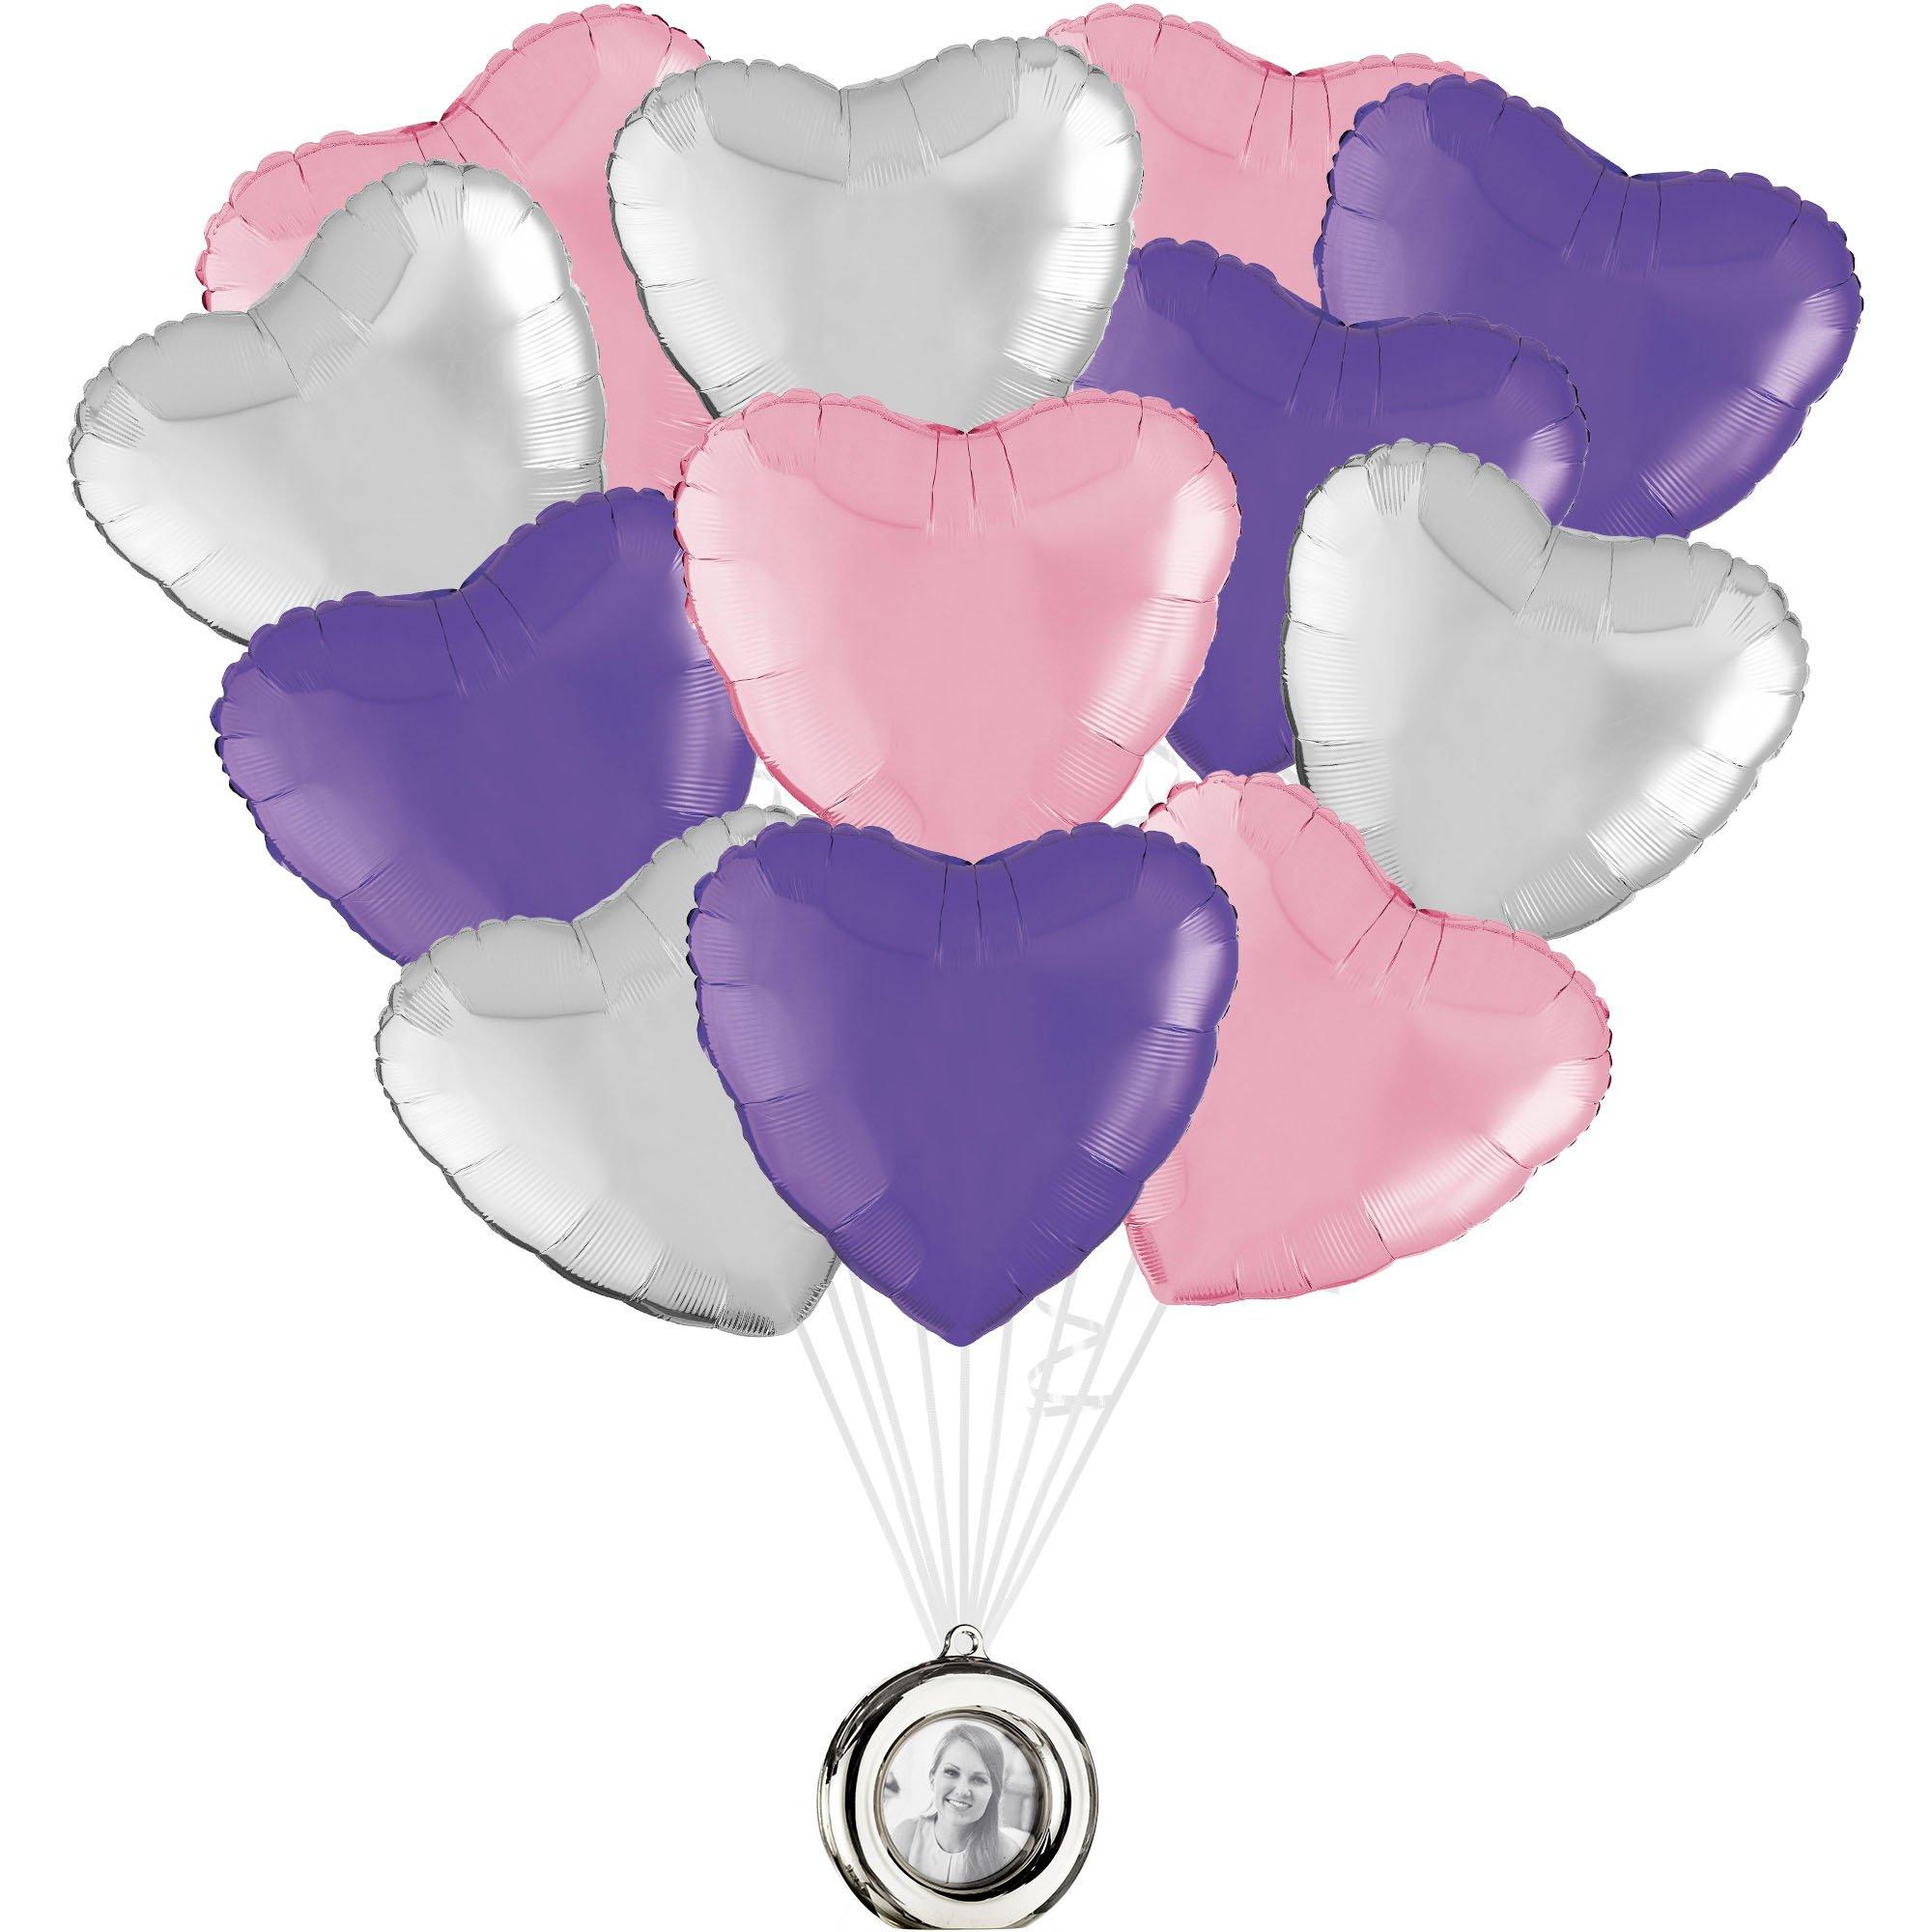 Pink, Purple & Silver Heart Foil Balloon Bouquet with Photo Frame Balloon Weight